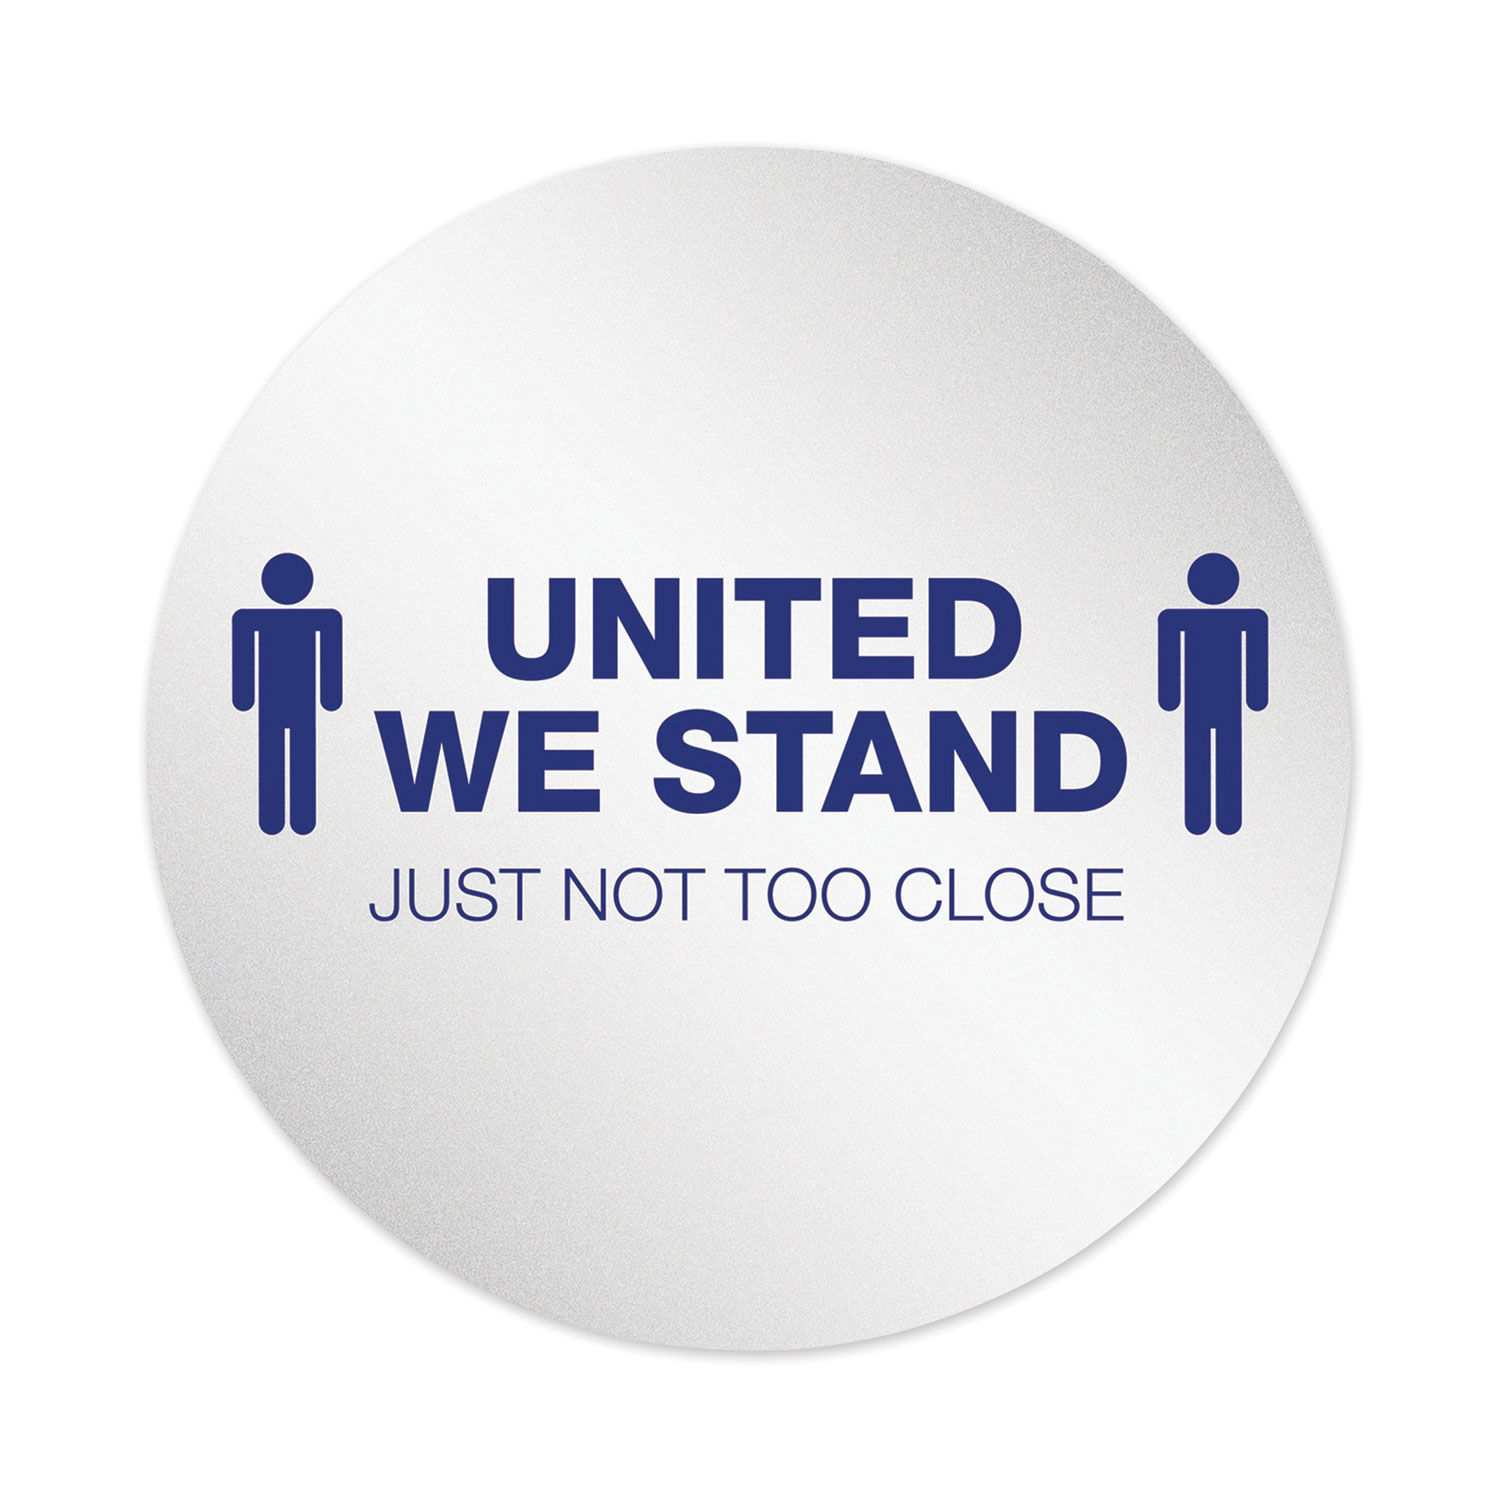 Personal Spacing Discs United We Stand, 20" dia, White/Blue, 6/Pack